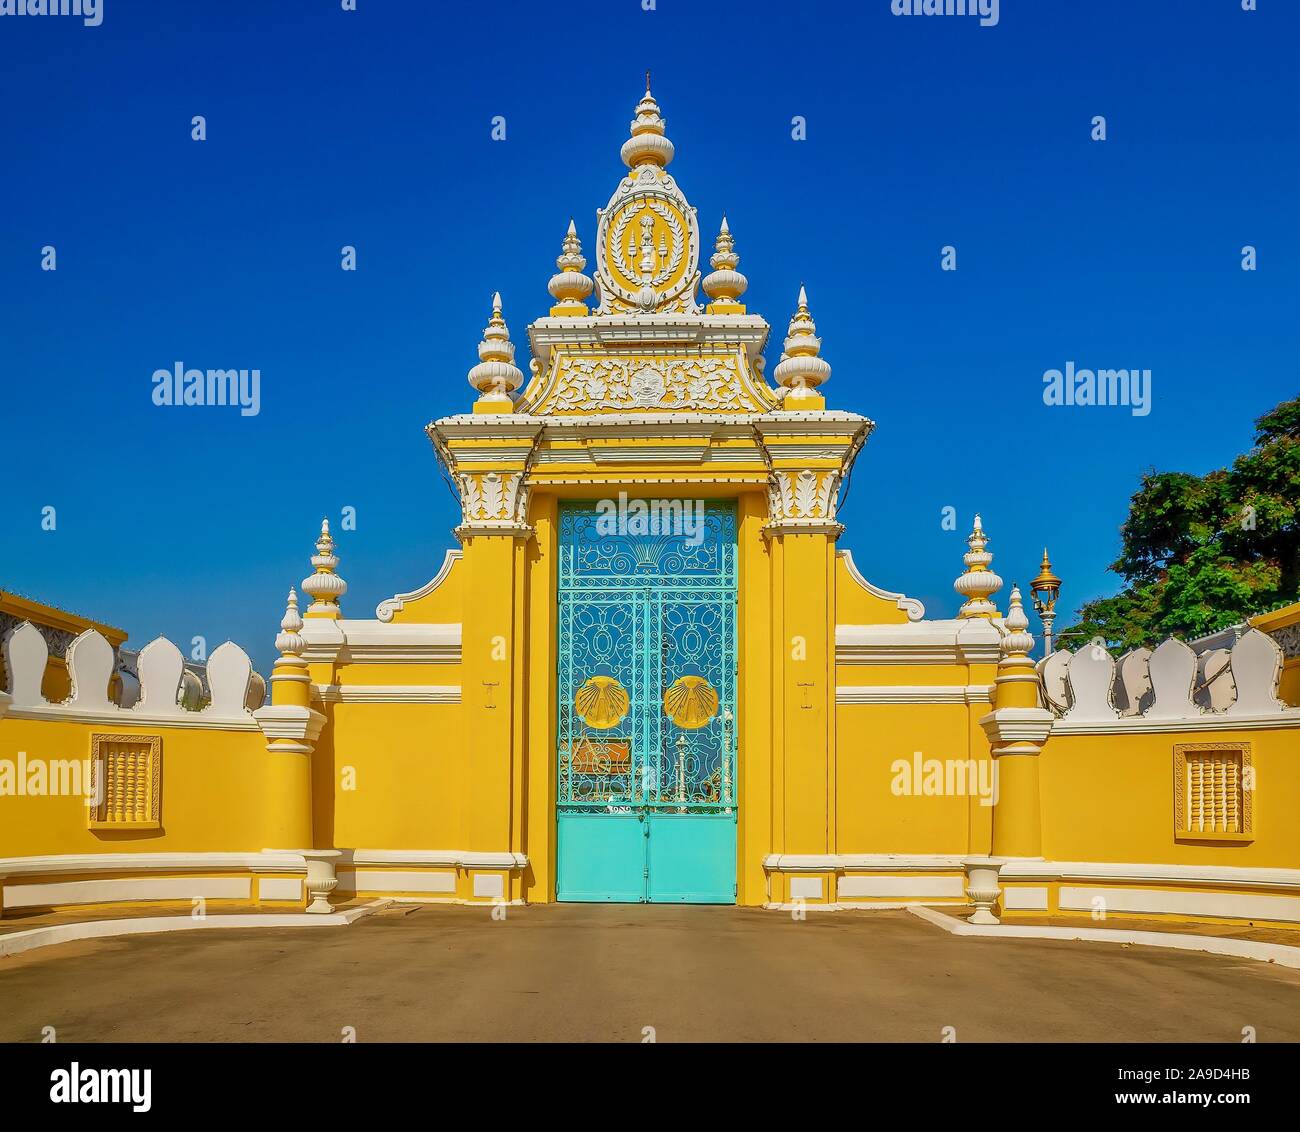 Close-up view of the Victory Gate of the Royal Palace and Silver Pagoda compound, used only by the royal family and dignitaries. Stock Photo